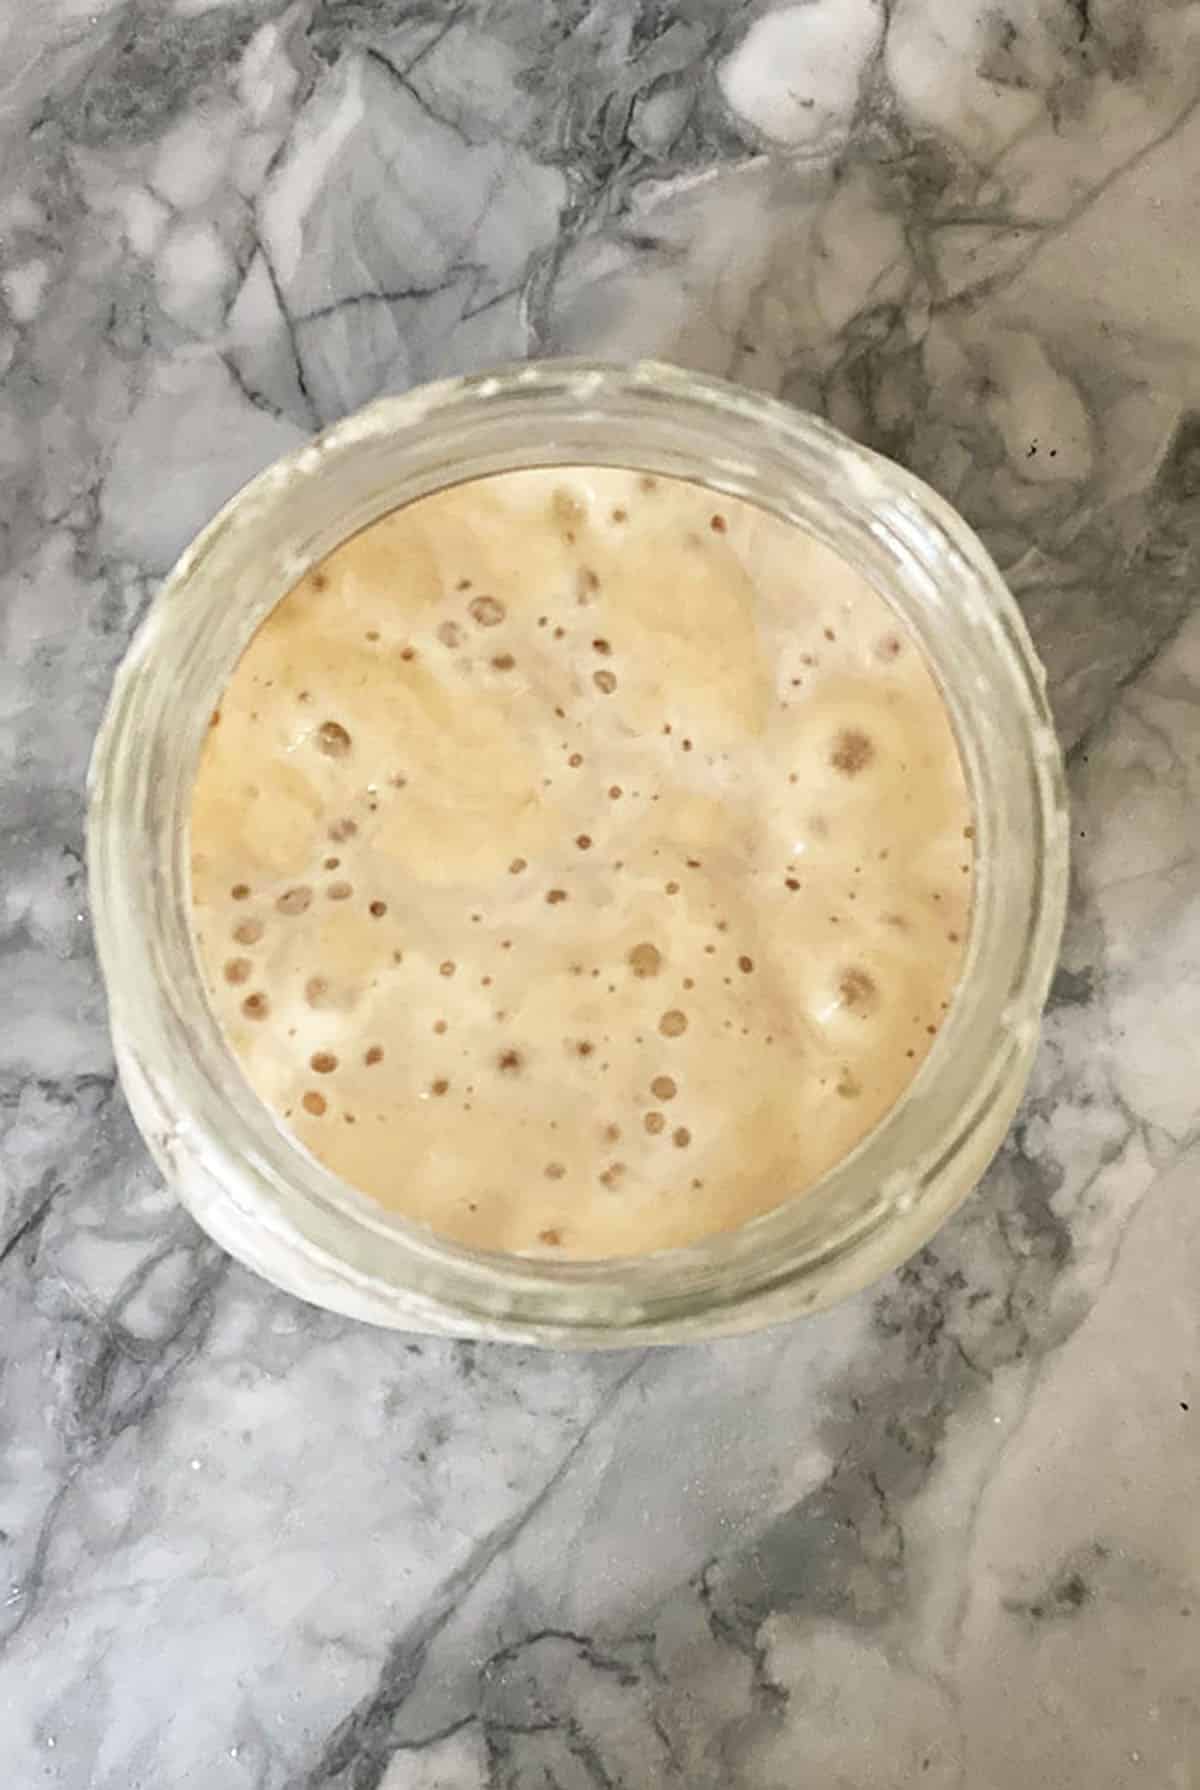 Sourdough starter with bubbles on a marble countertop.